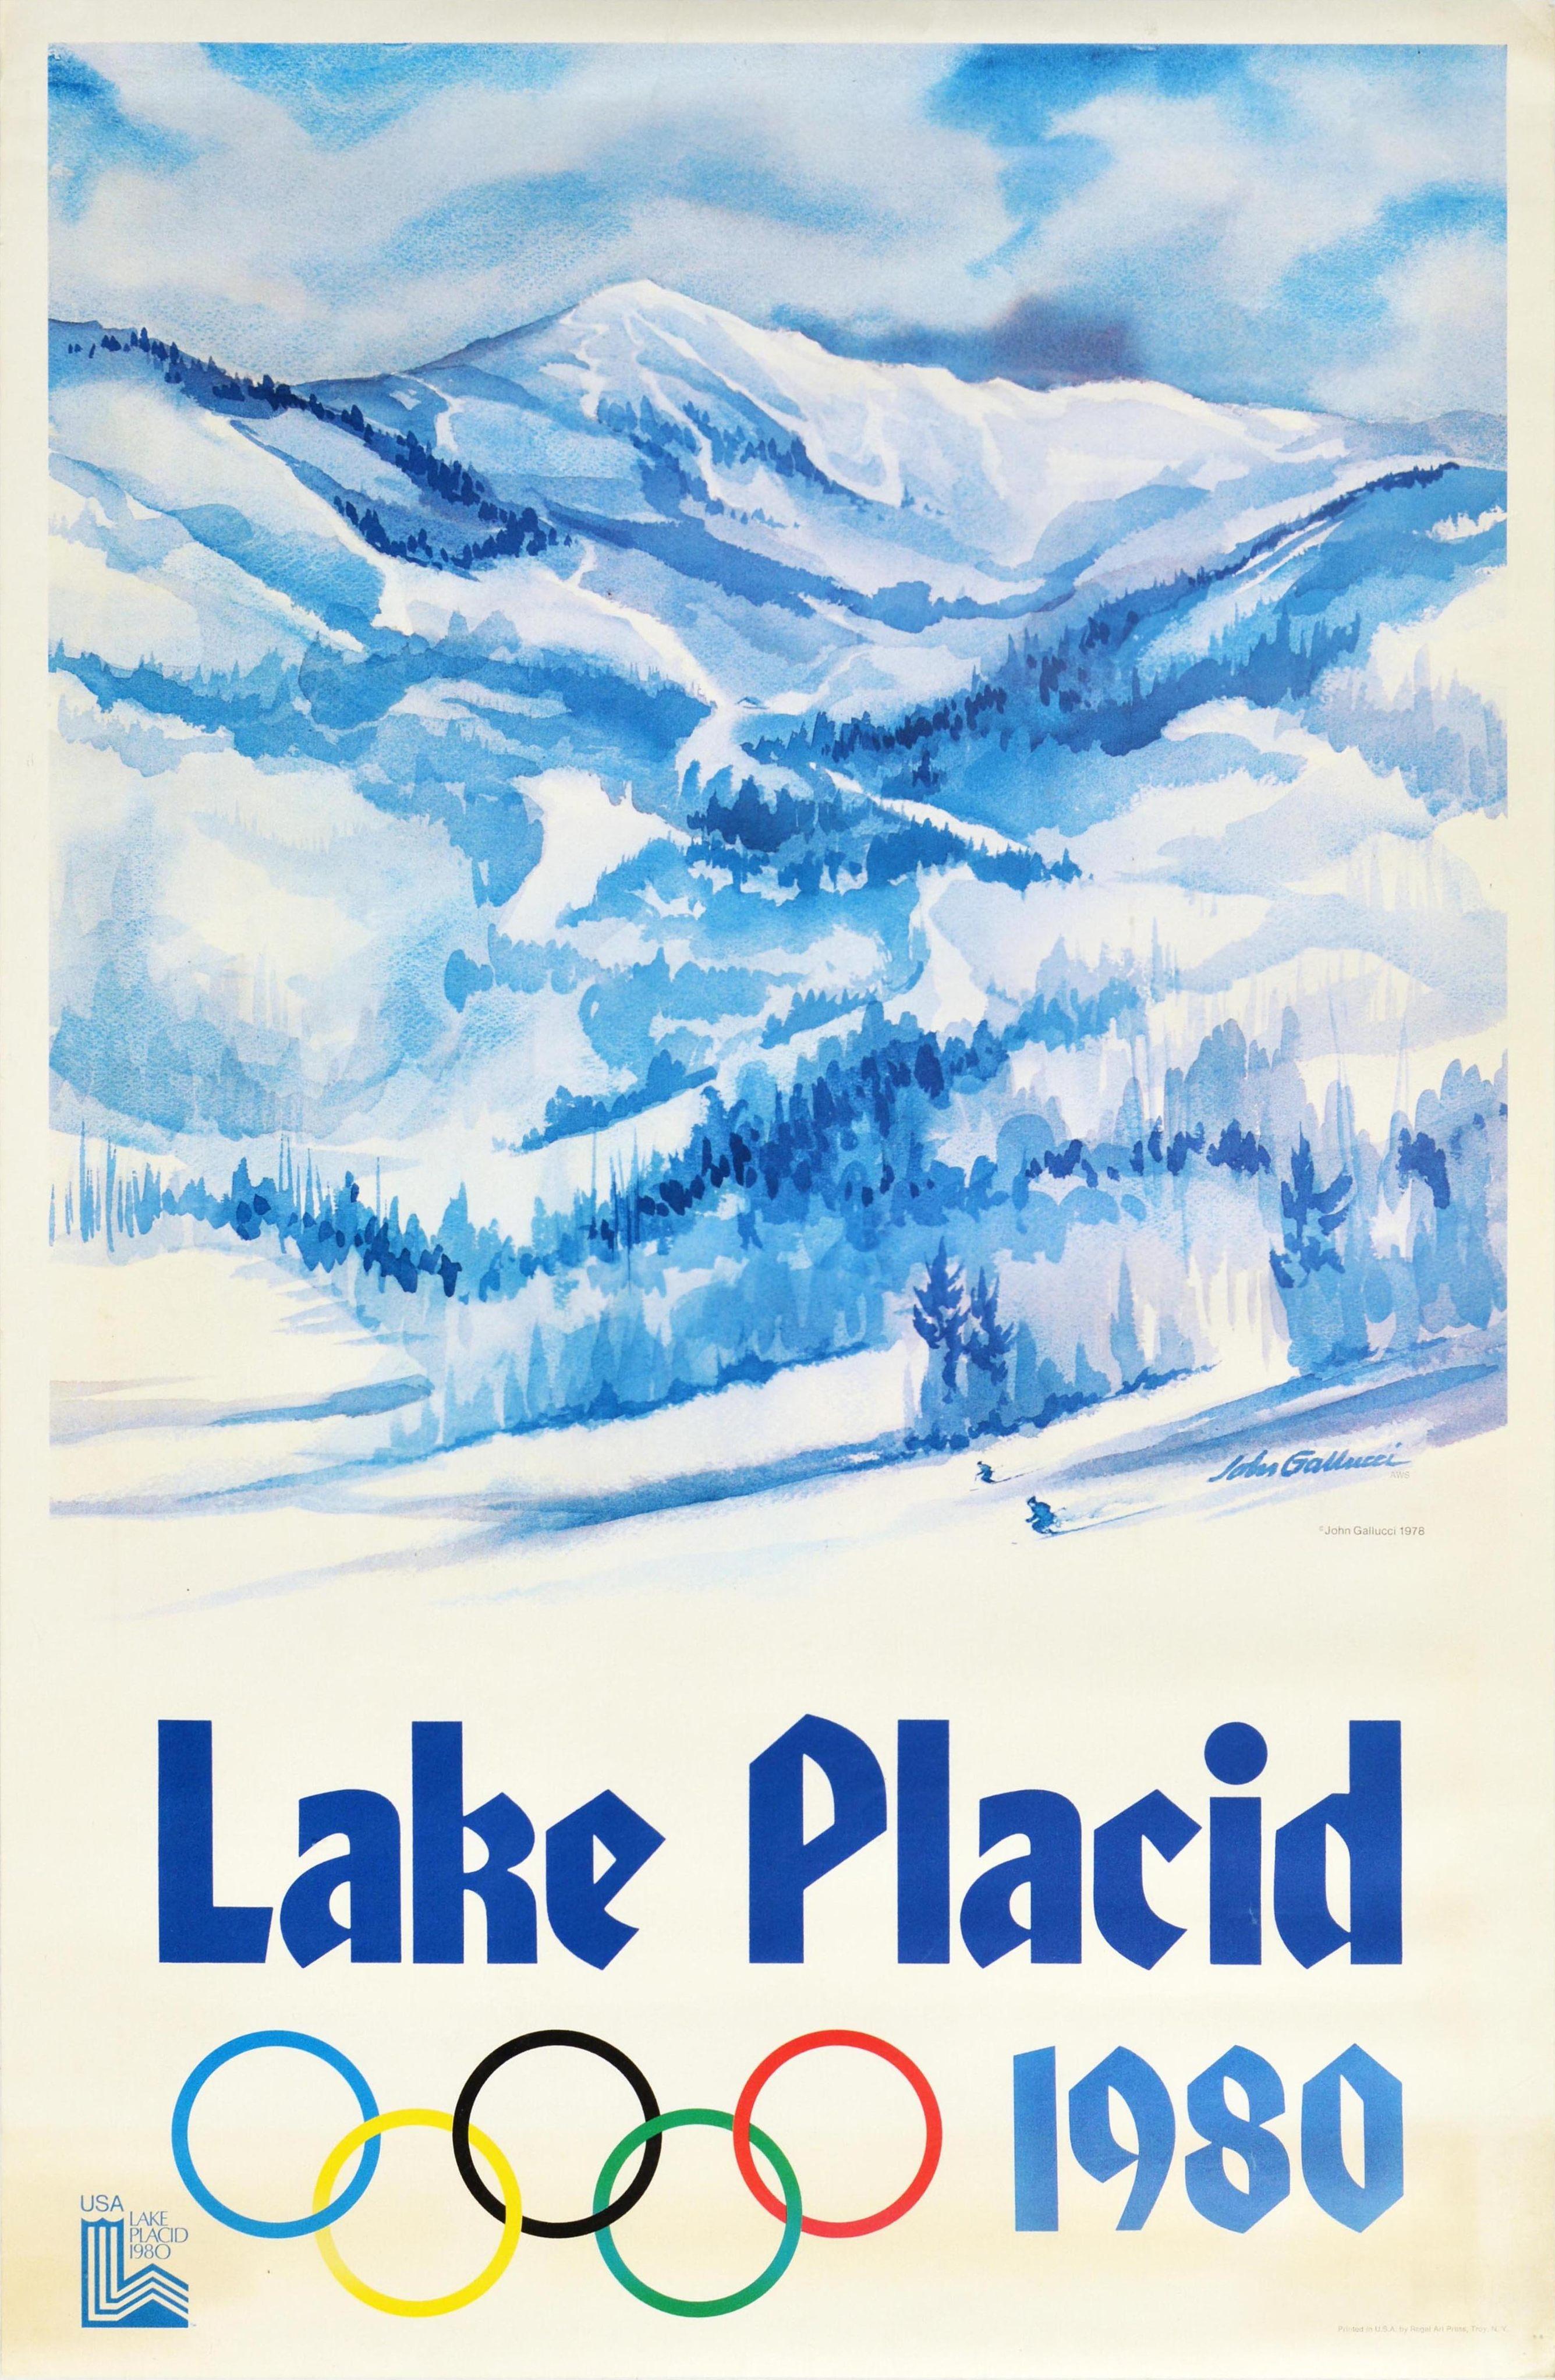 Original vintage sports advertising poster for the XIII Olympic Winter Games Lake Placid 1980 held in New York USA from 13-24 February featuring a stunning view by the American watercolour artist John Gallucci (1918-2009) showing skiers skiing on a